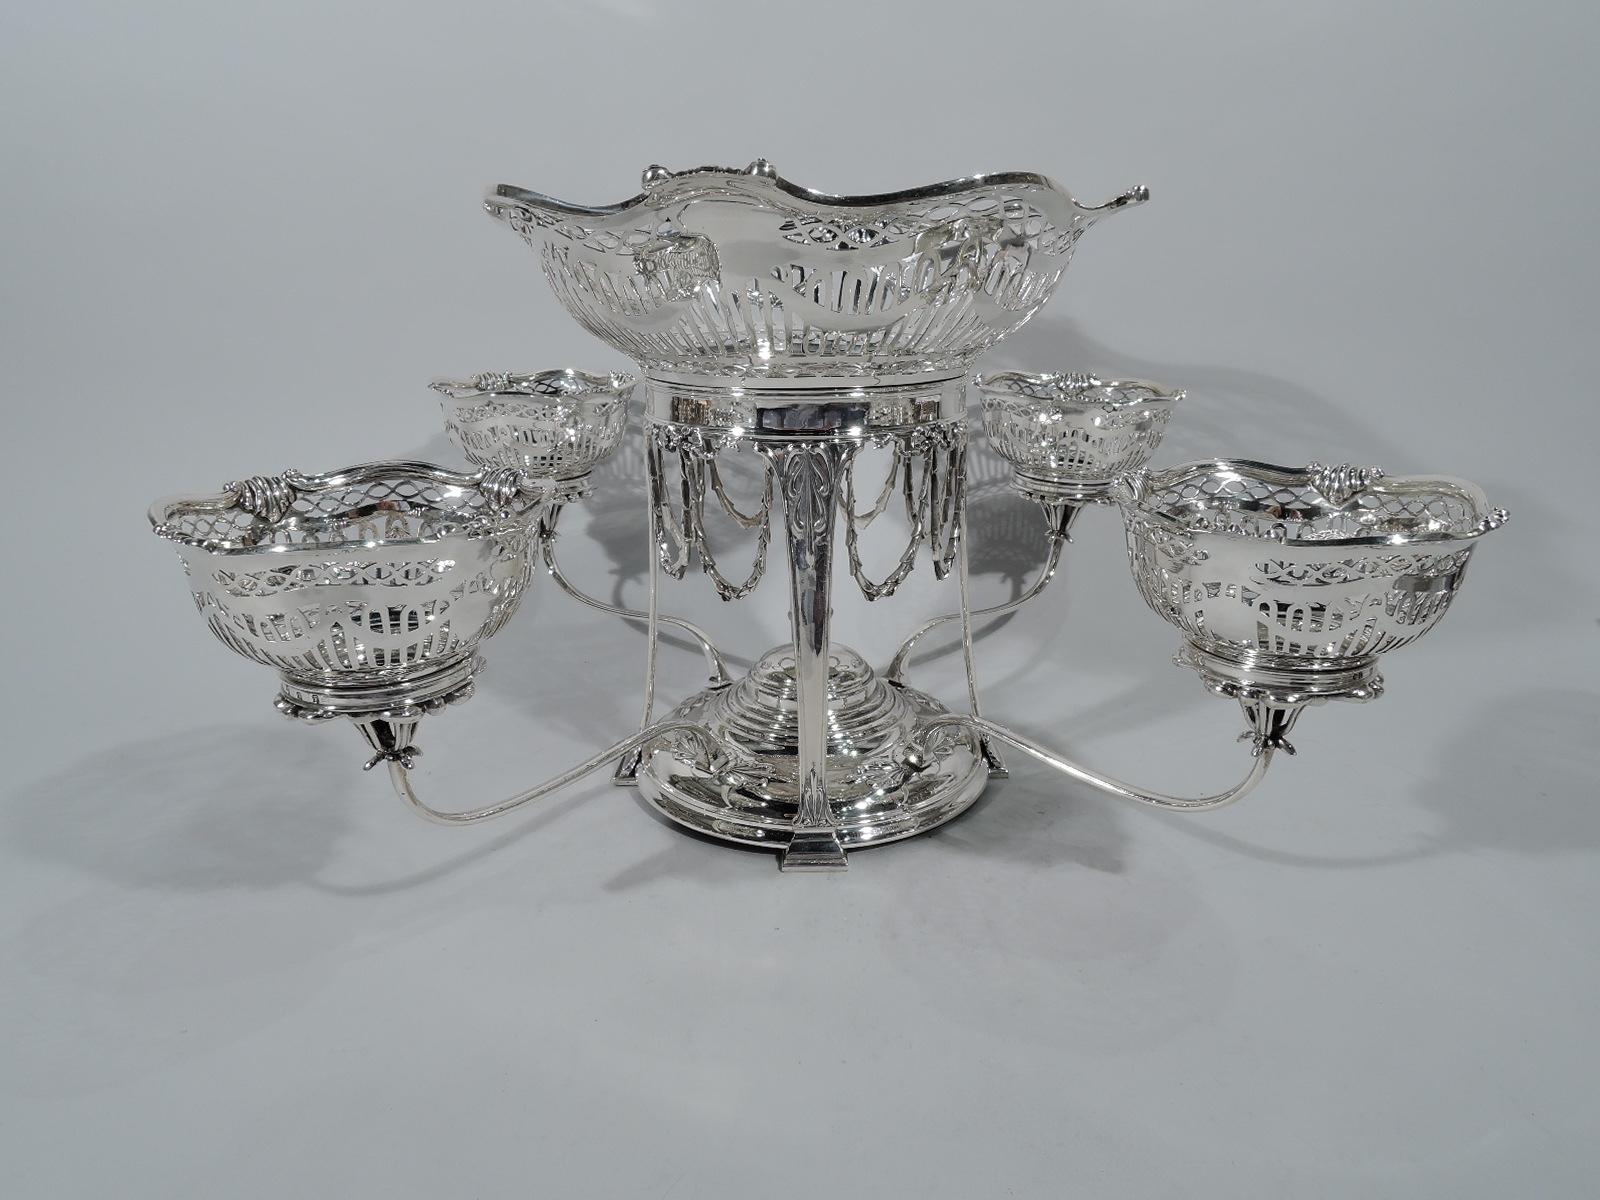 Regency revival sterling silver epergne. Made by Hamilton & Inches in Edinburgh in 1912. Central ring with pendant imbricated leaf garlands, supported by four pilasters terminating in blocks and mounted at base to stepped dome with central vase